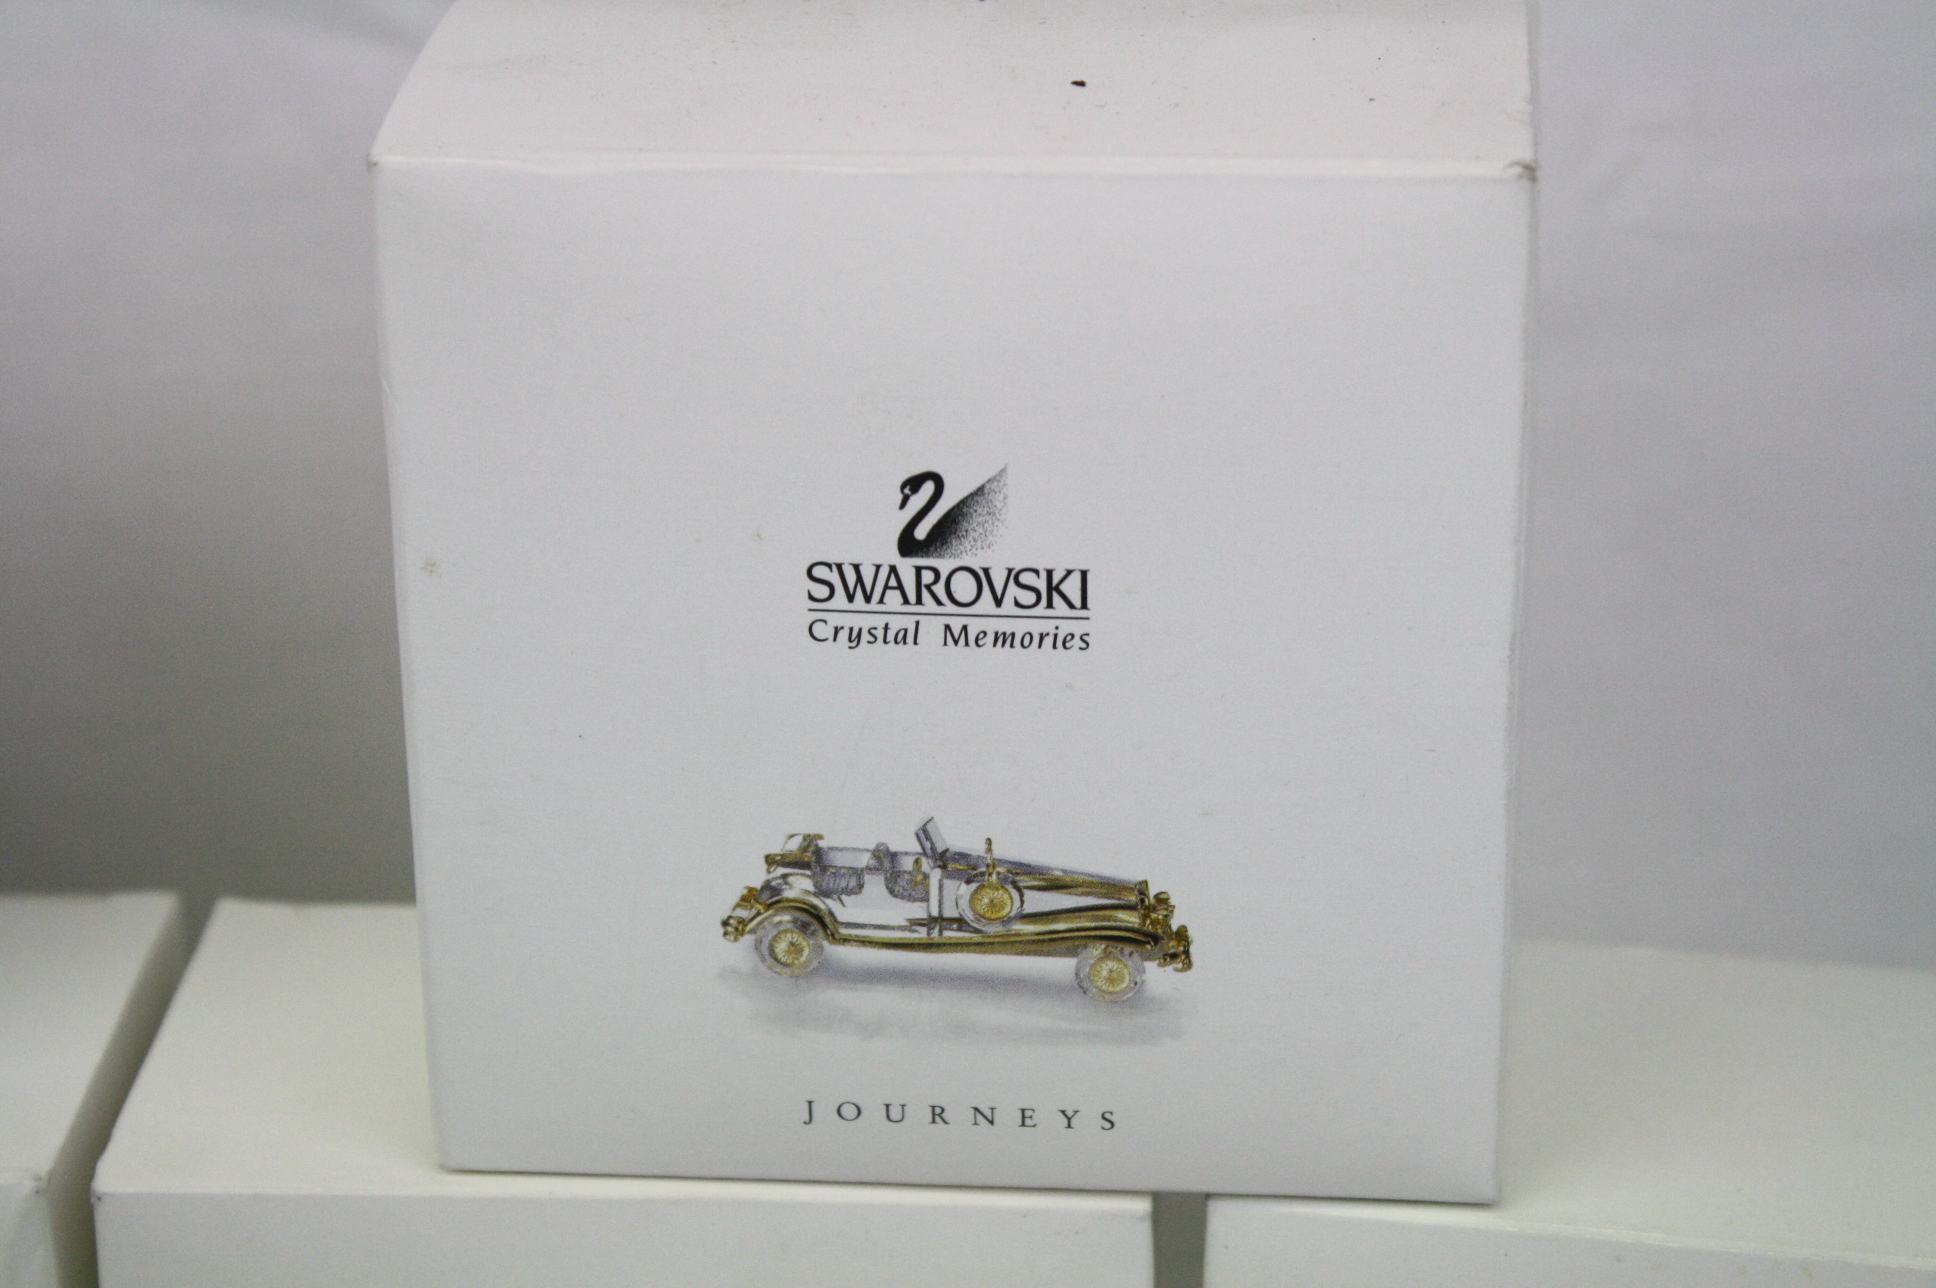 Collection of six Swarovski crystal memories 'Journeys' in gold with original boxes - Image 4 of 8